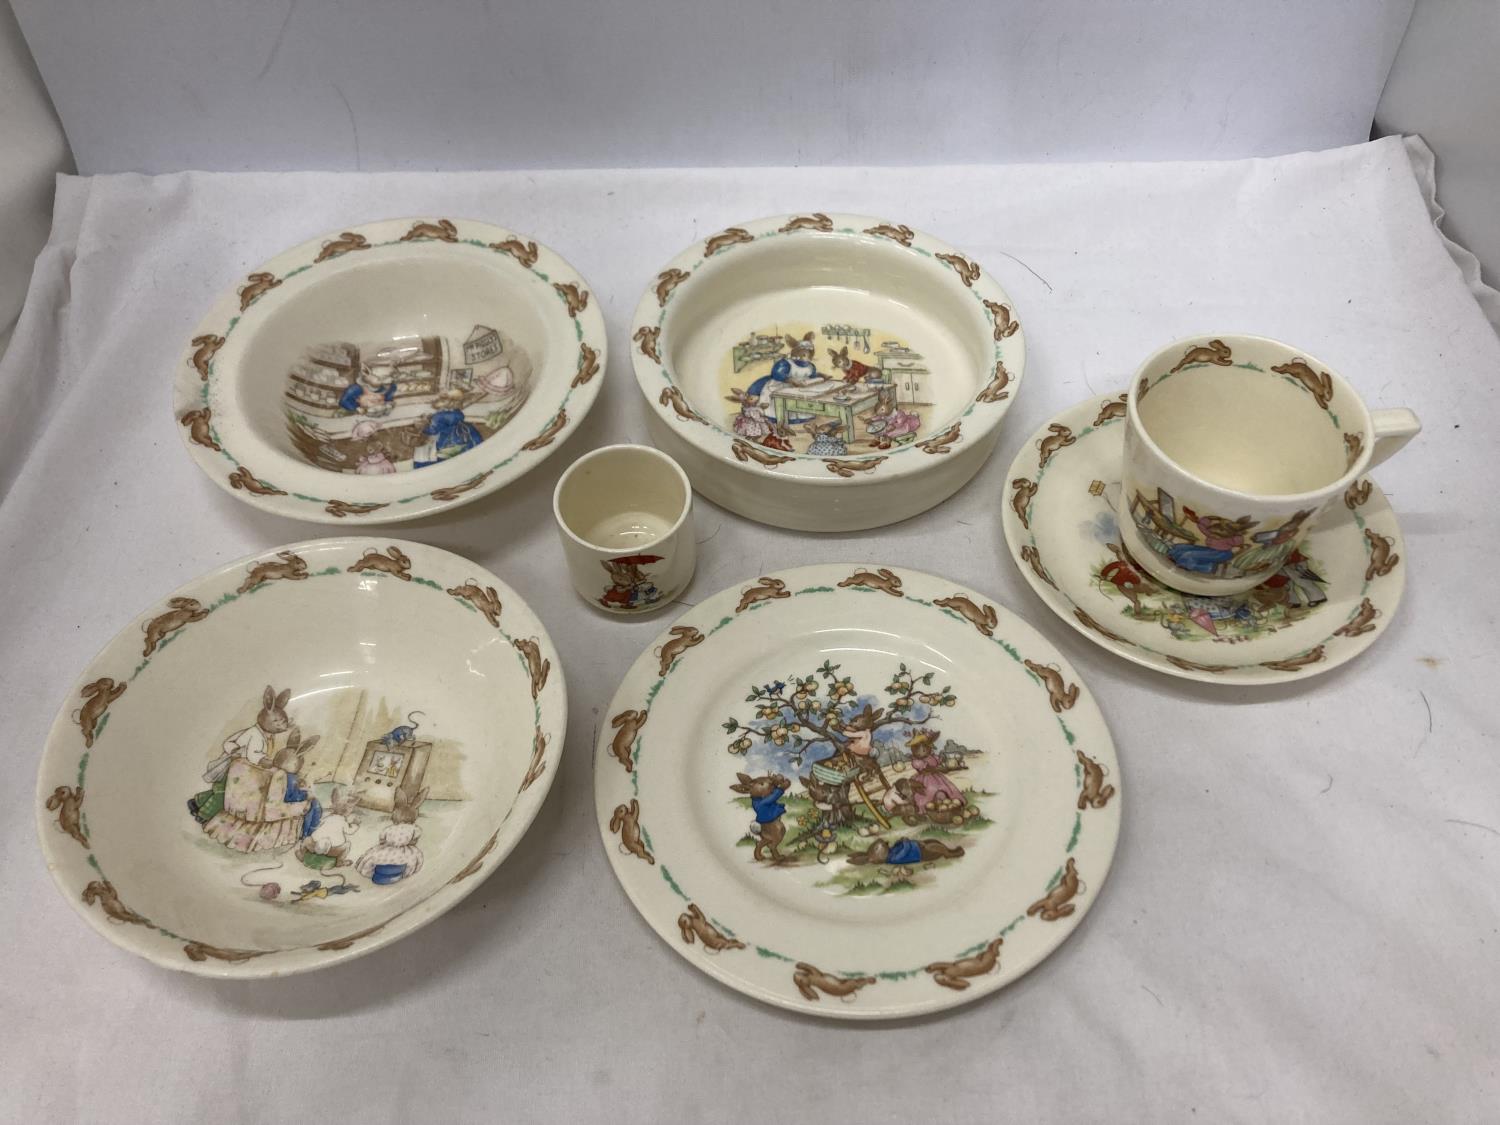 A COLLECTION OF ROYAL DOULTON 'BUNNYKINS' DINNERWARE TO INCLUDE BOWLS, PLATES, A CUP AND SAUCER